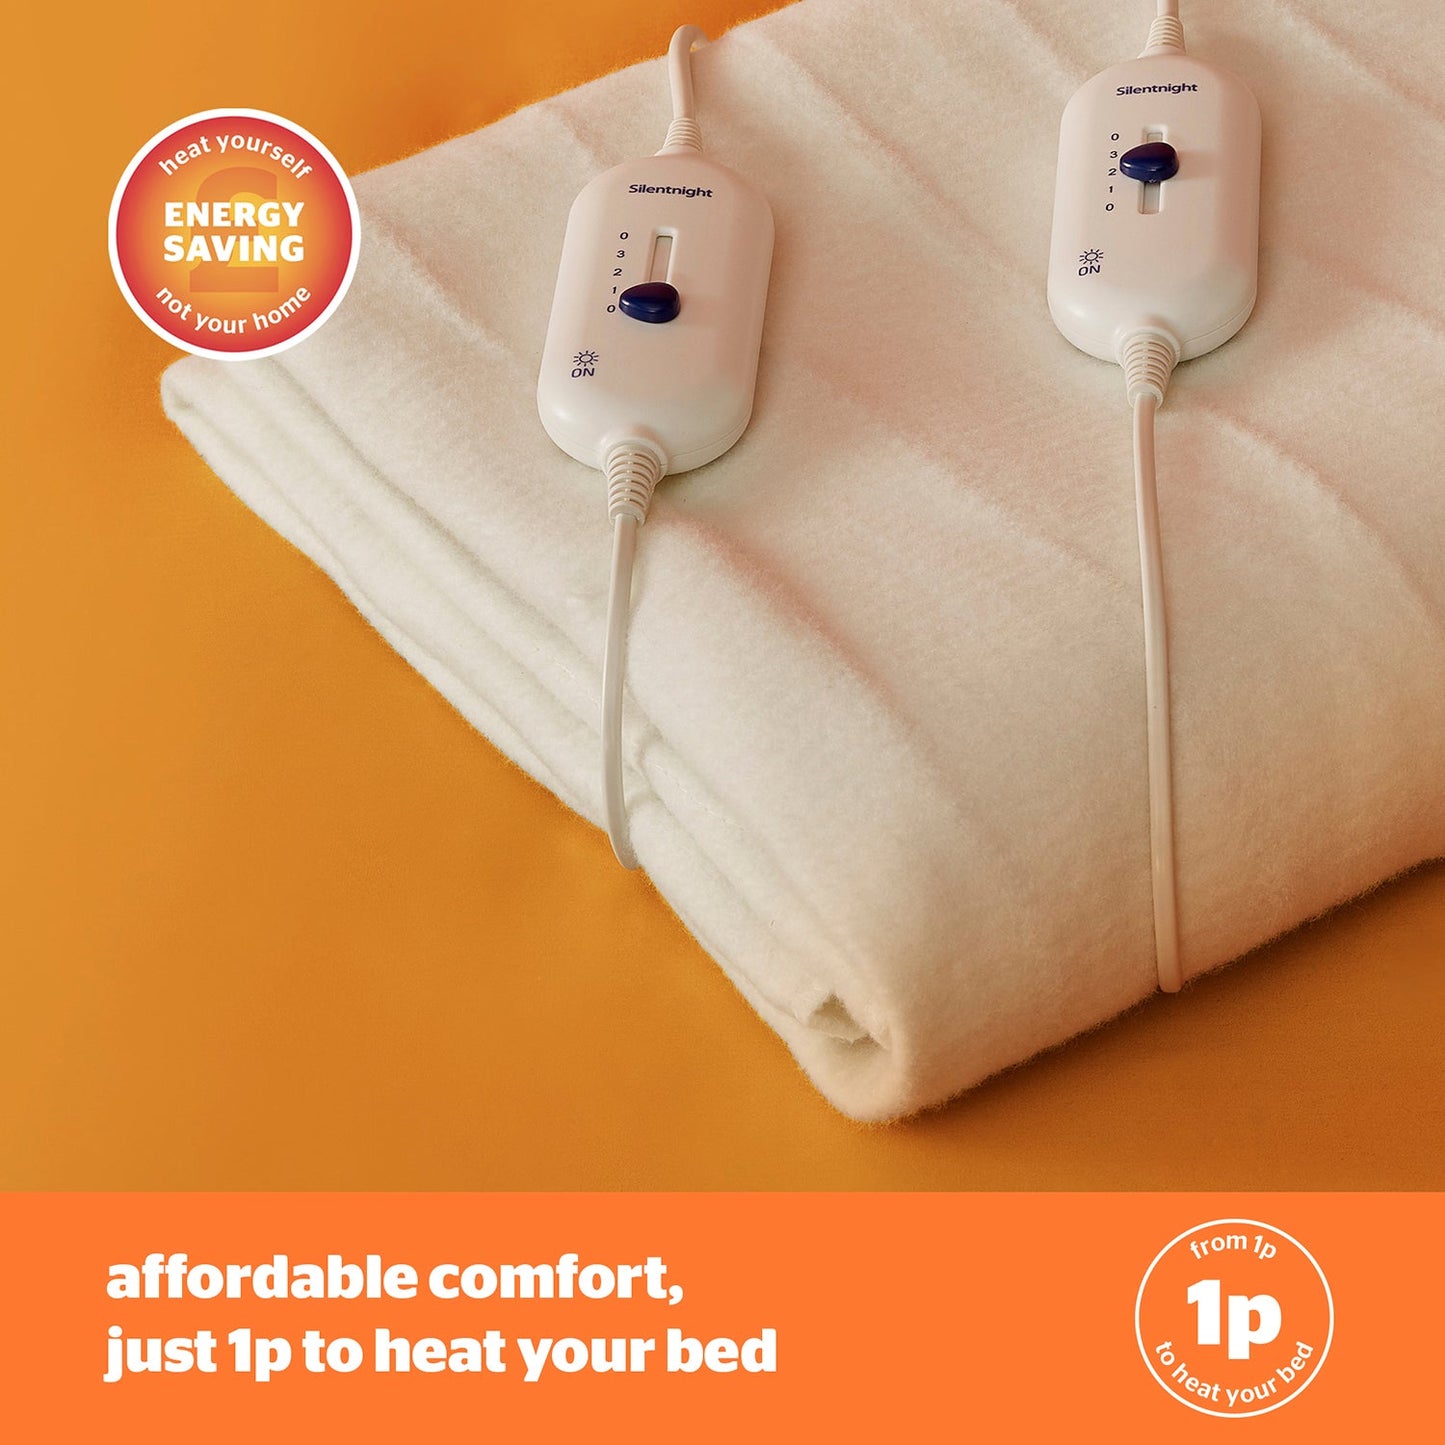 Silentnight Yours and Mine Dual Control Electric Blanket